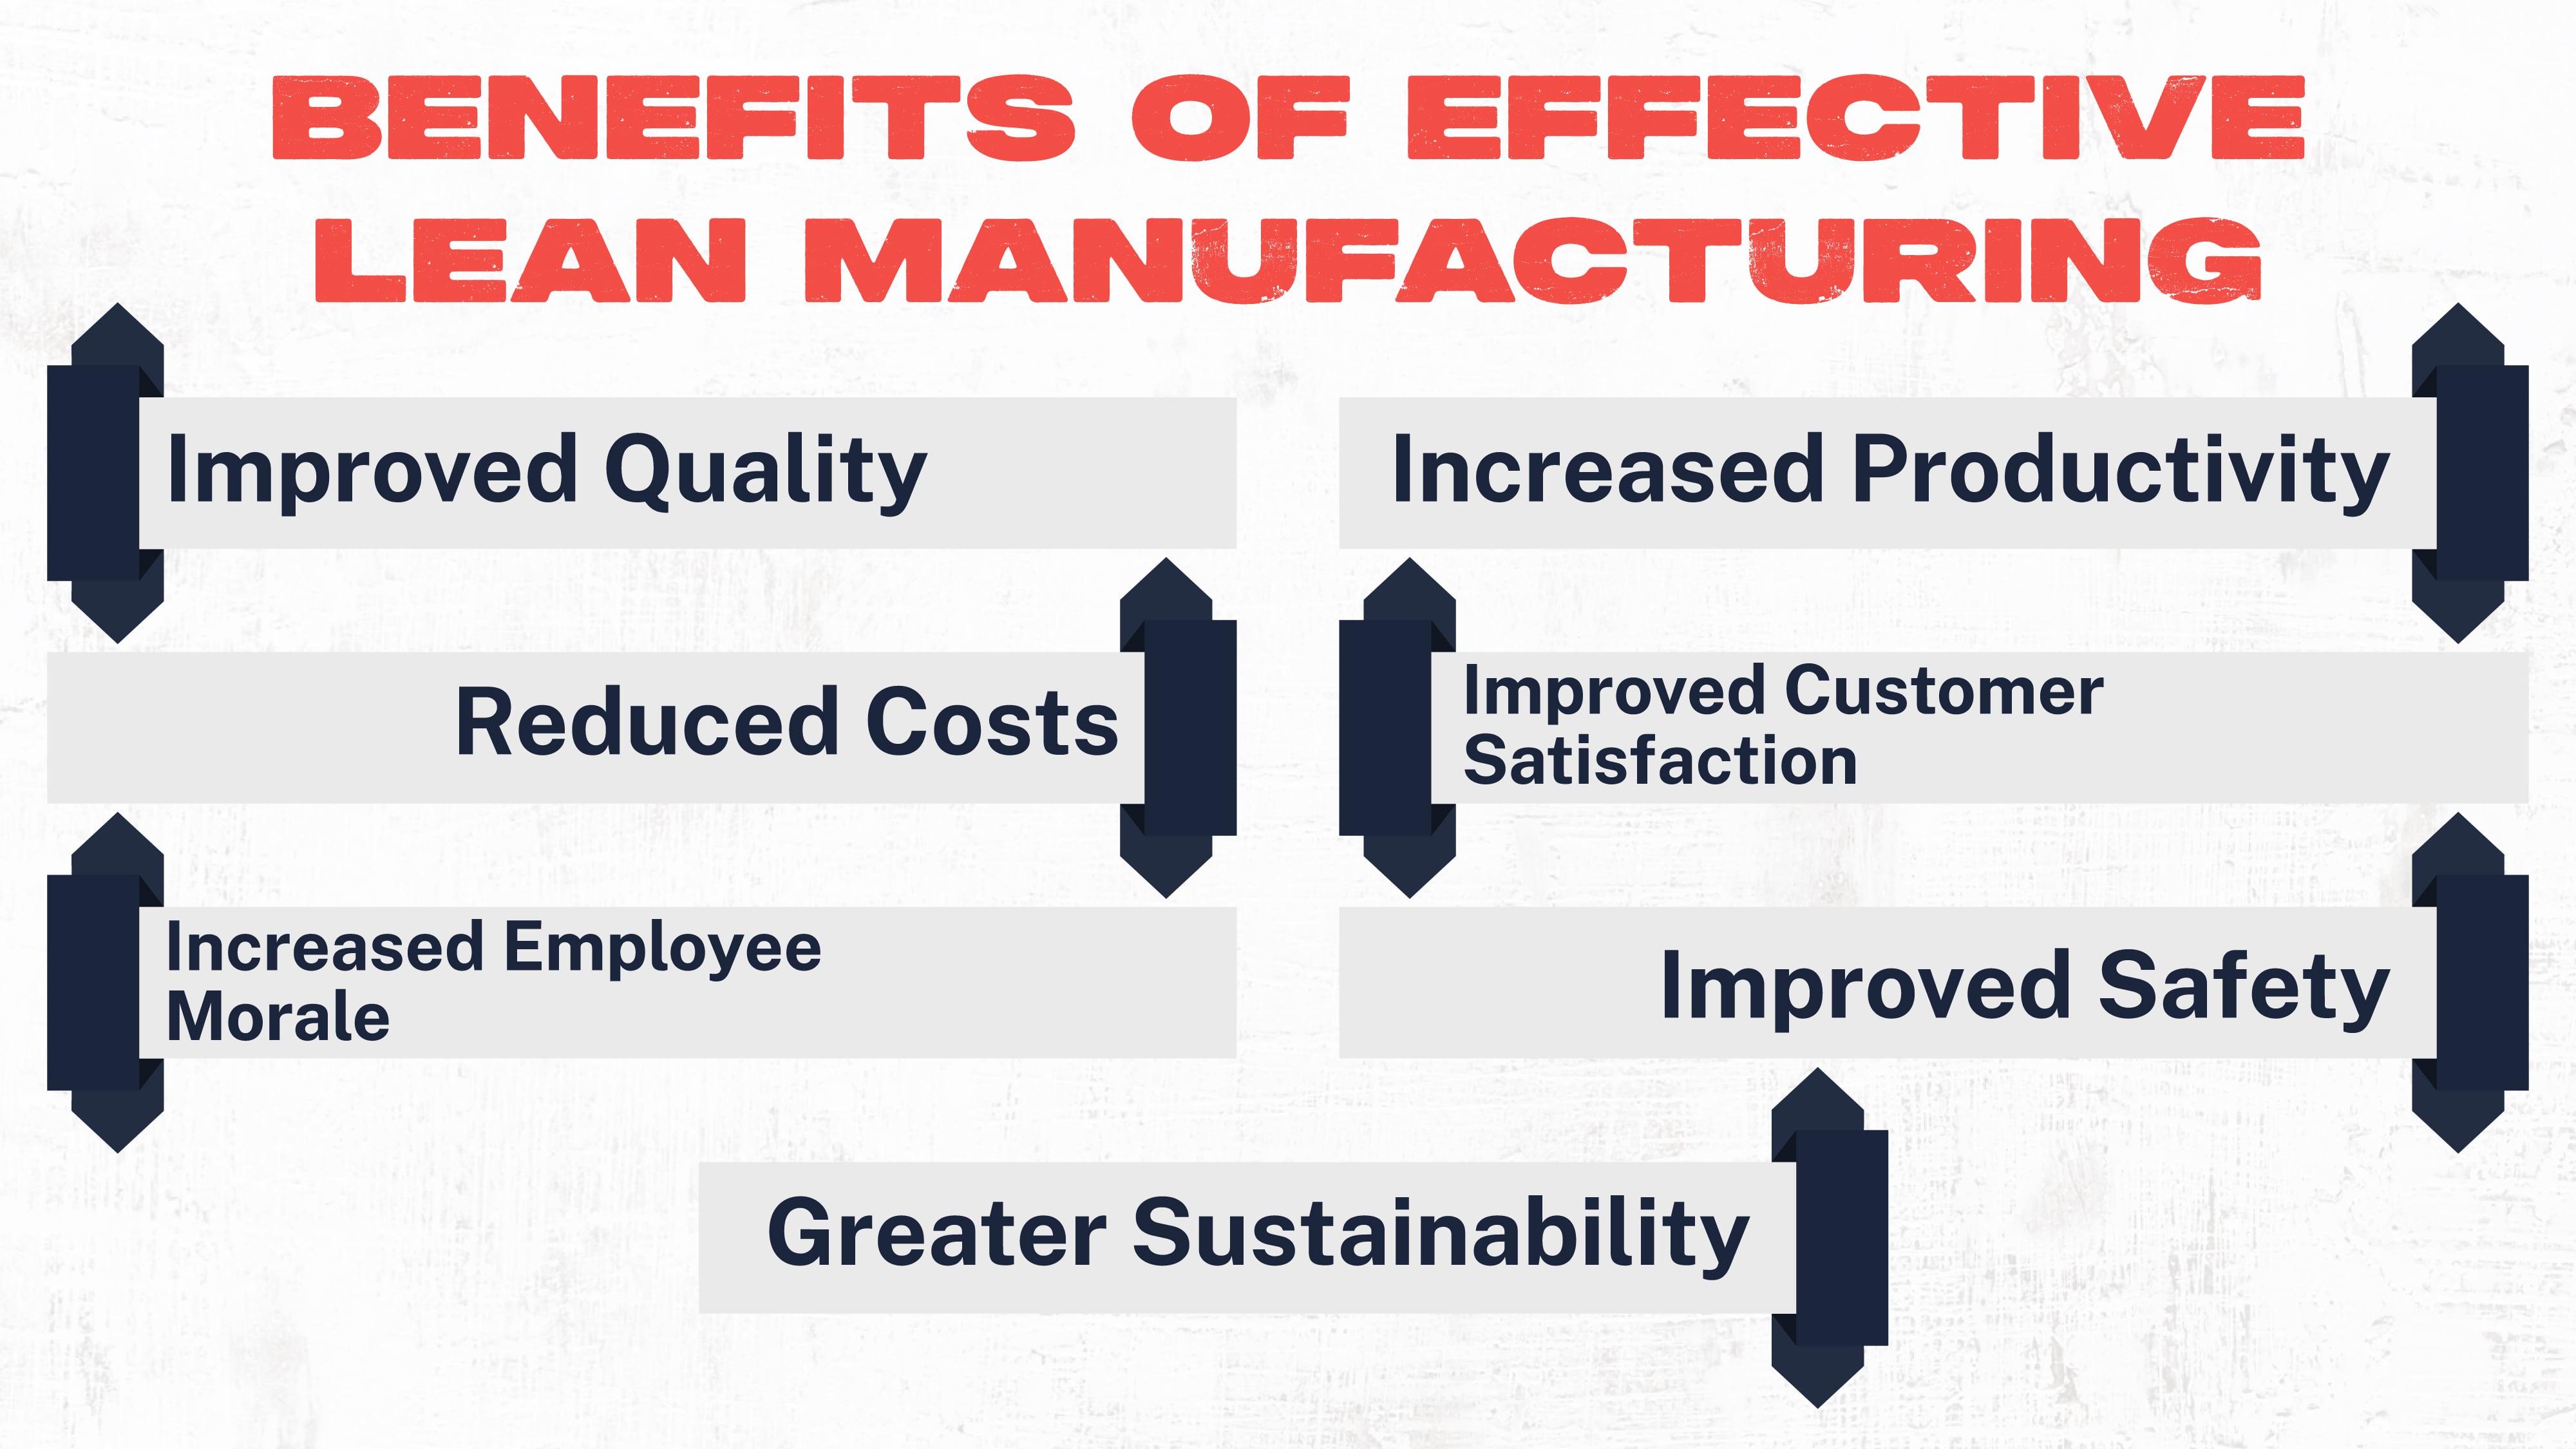 Benefits of Effective Lean Manufacturing